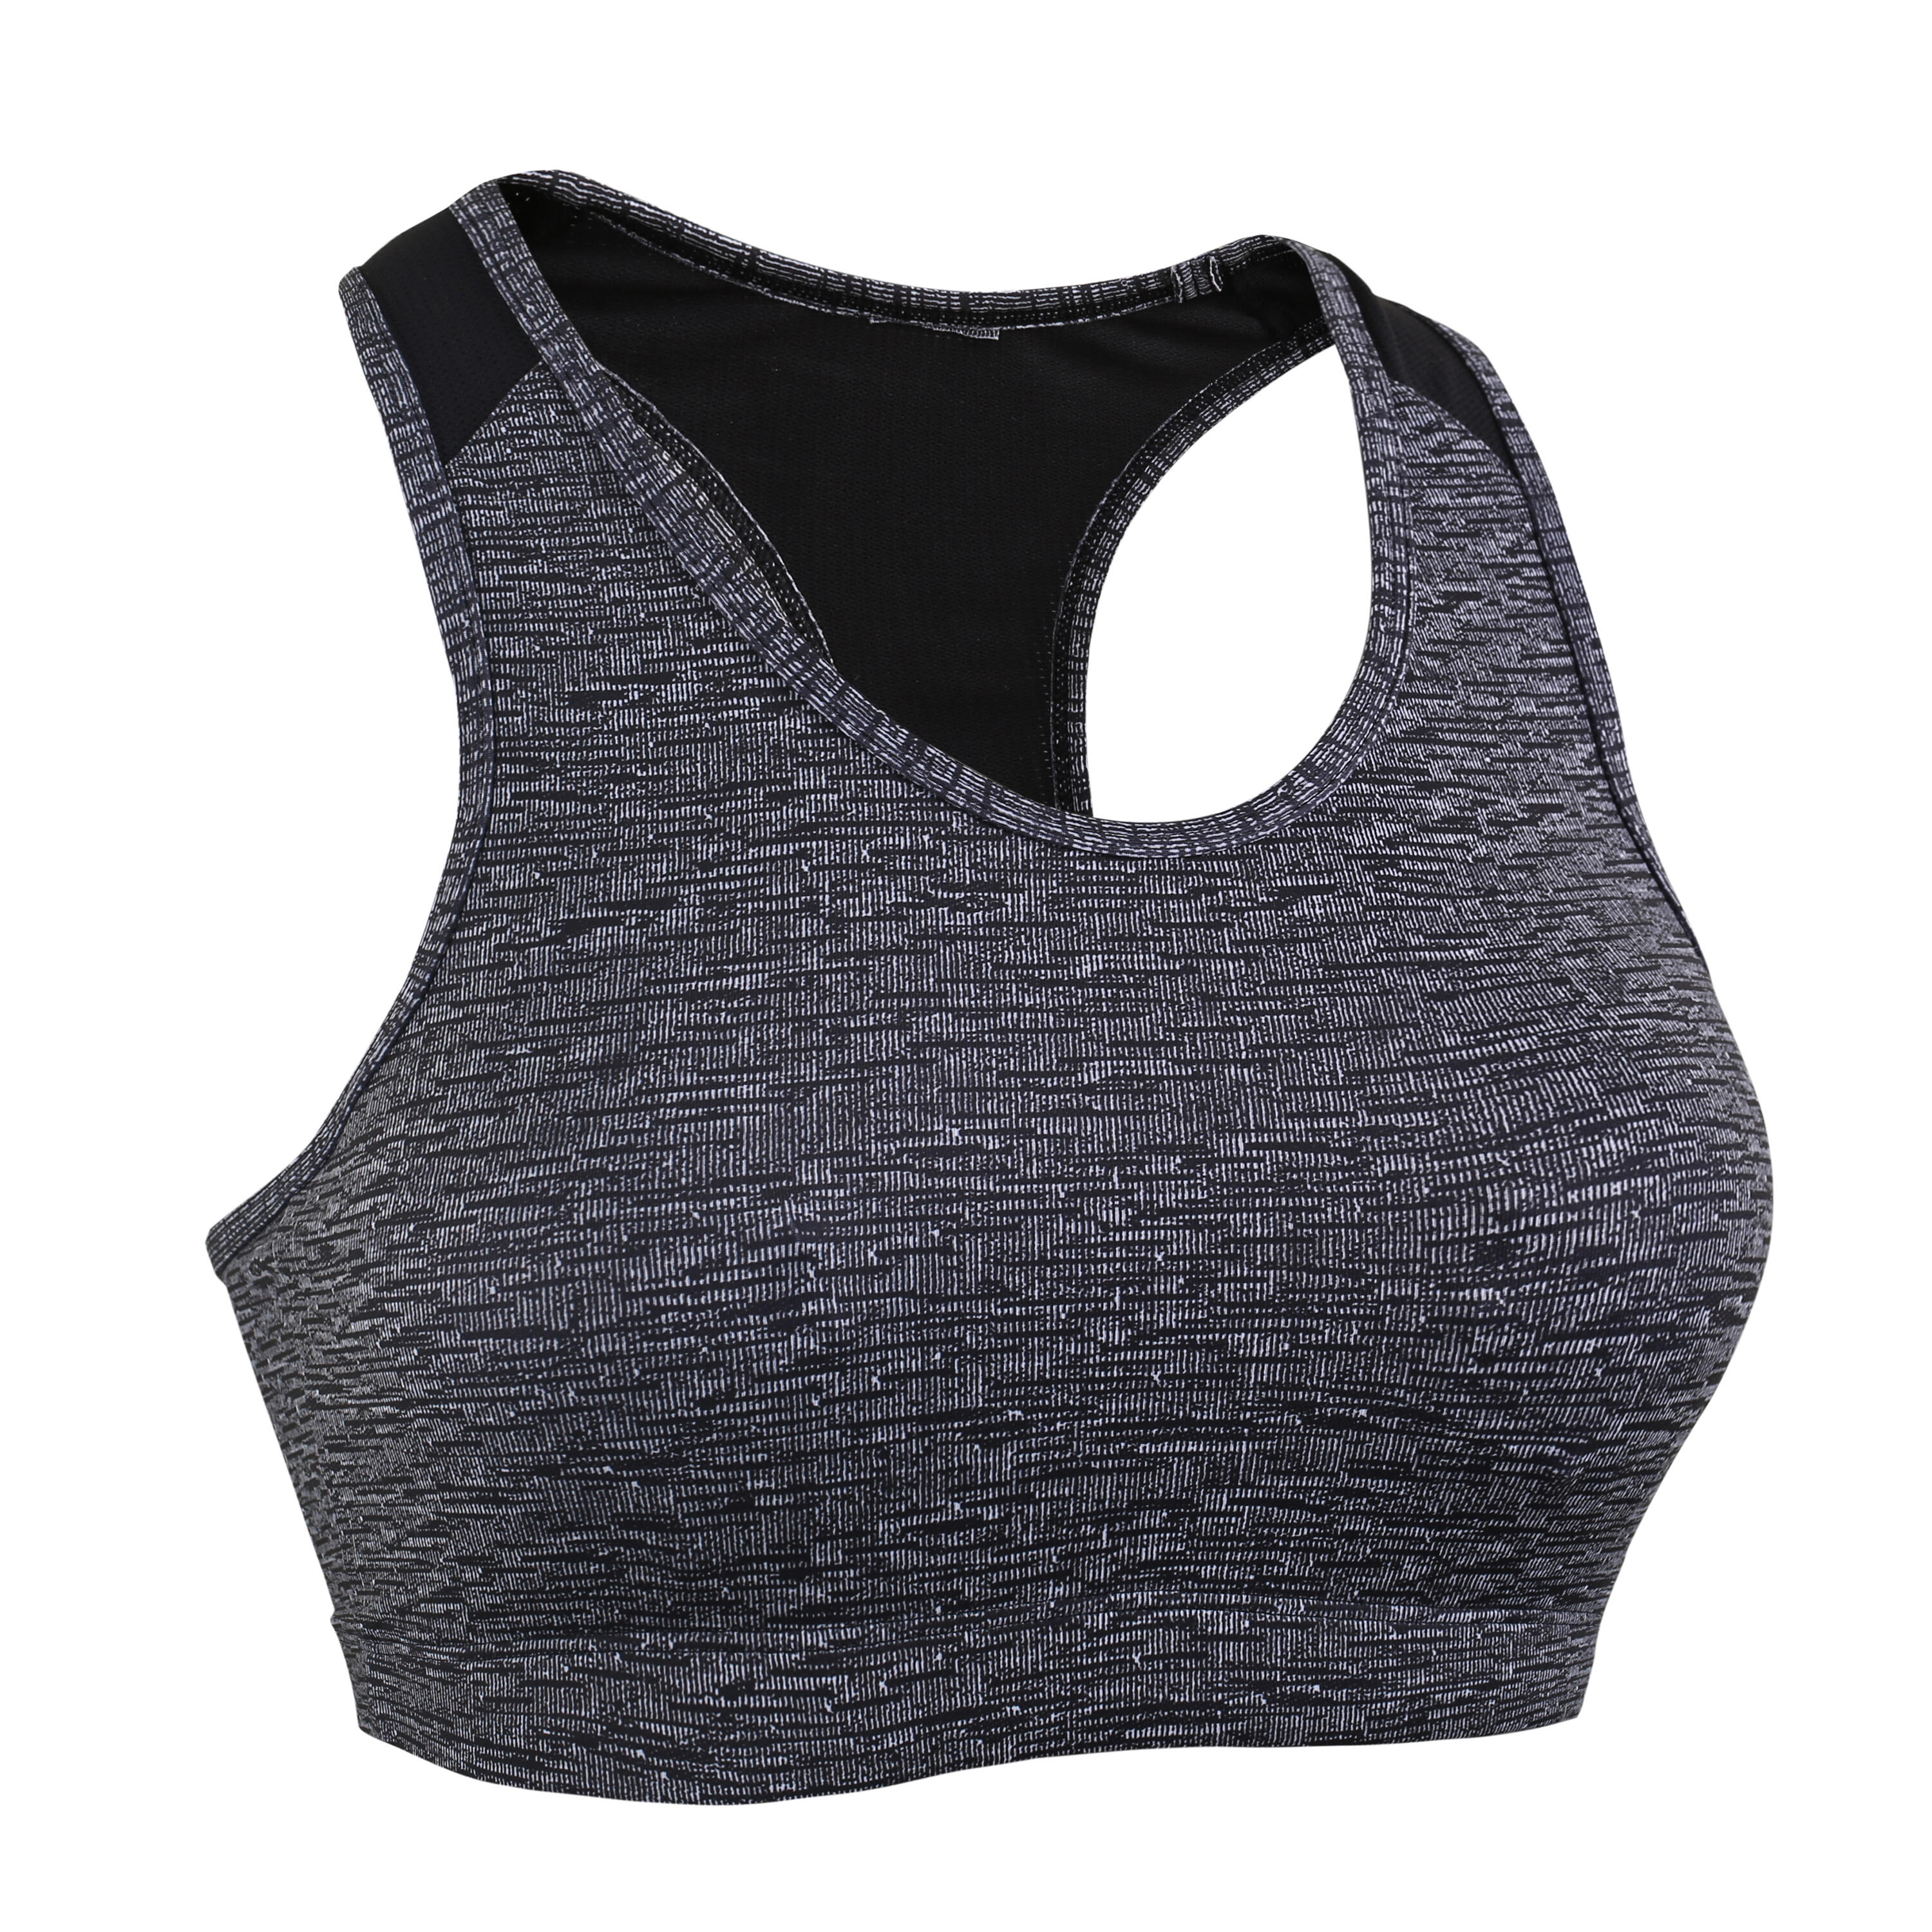 Cotton On Body & Kmart sports bra (2 for $8), Women's Fashion, Activewear  on Carousell